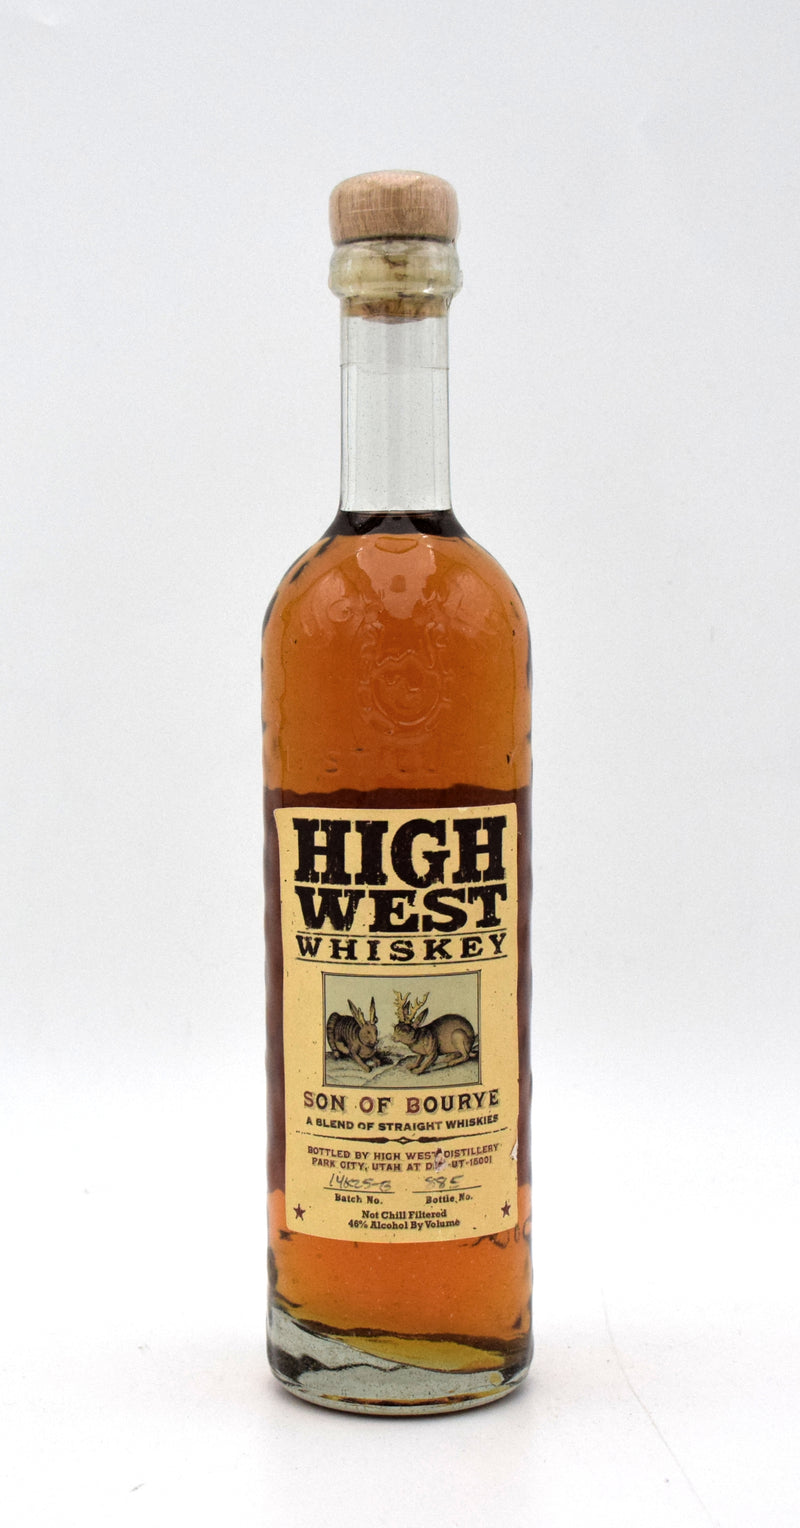 High West 'Son of Bourye'